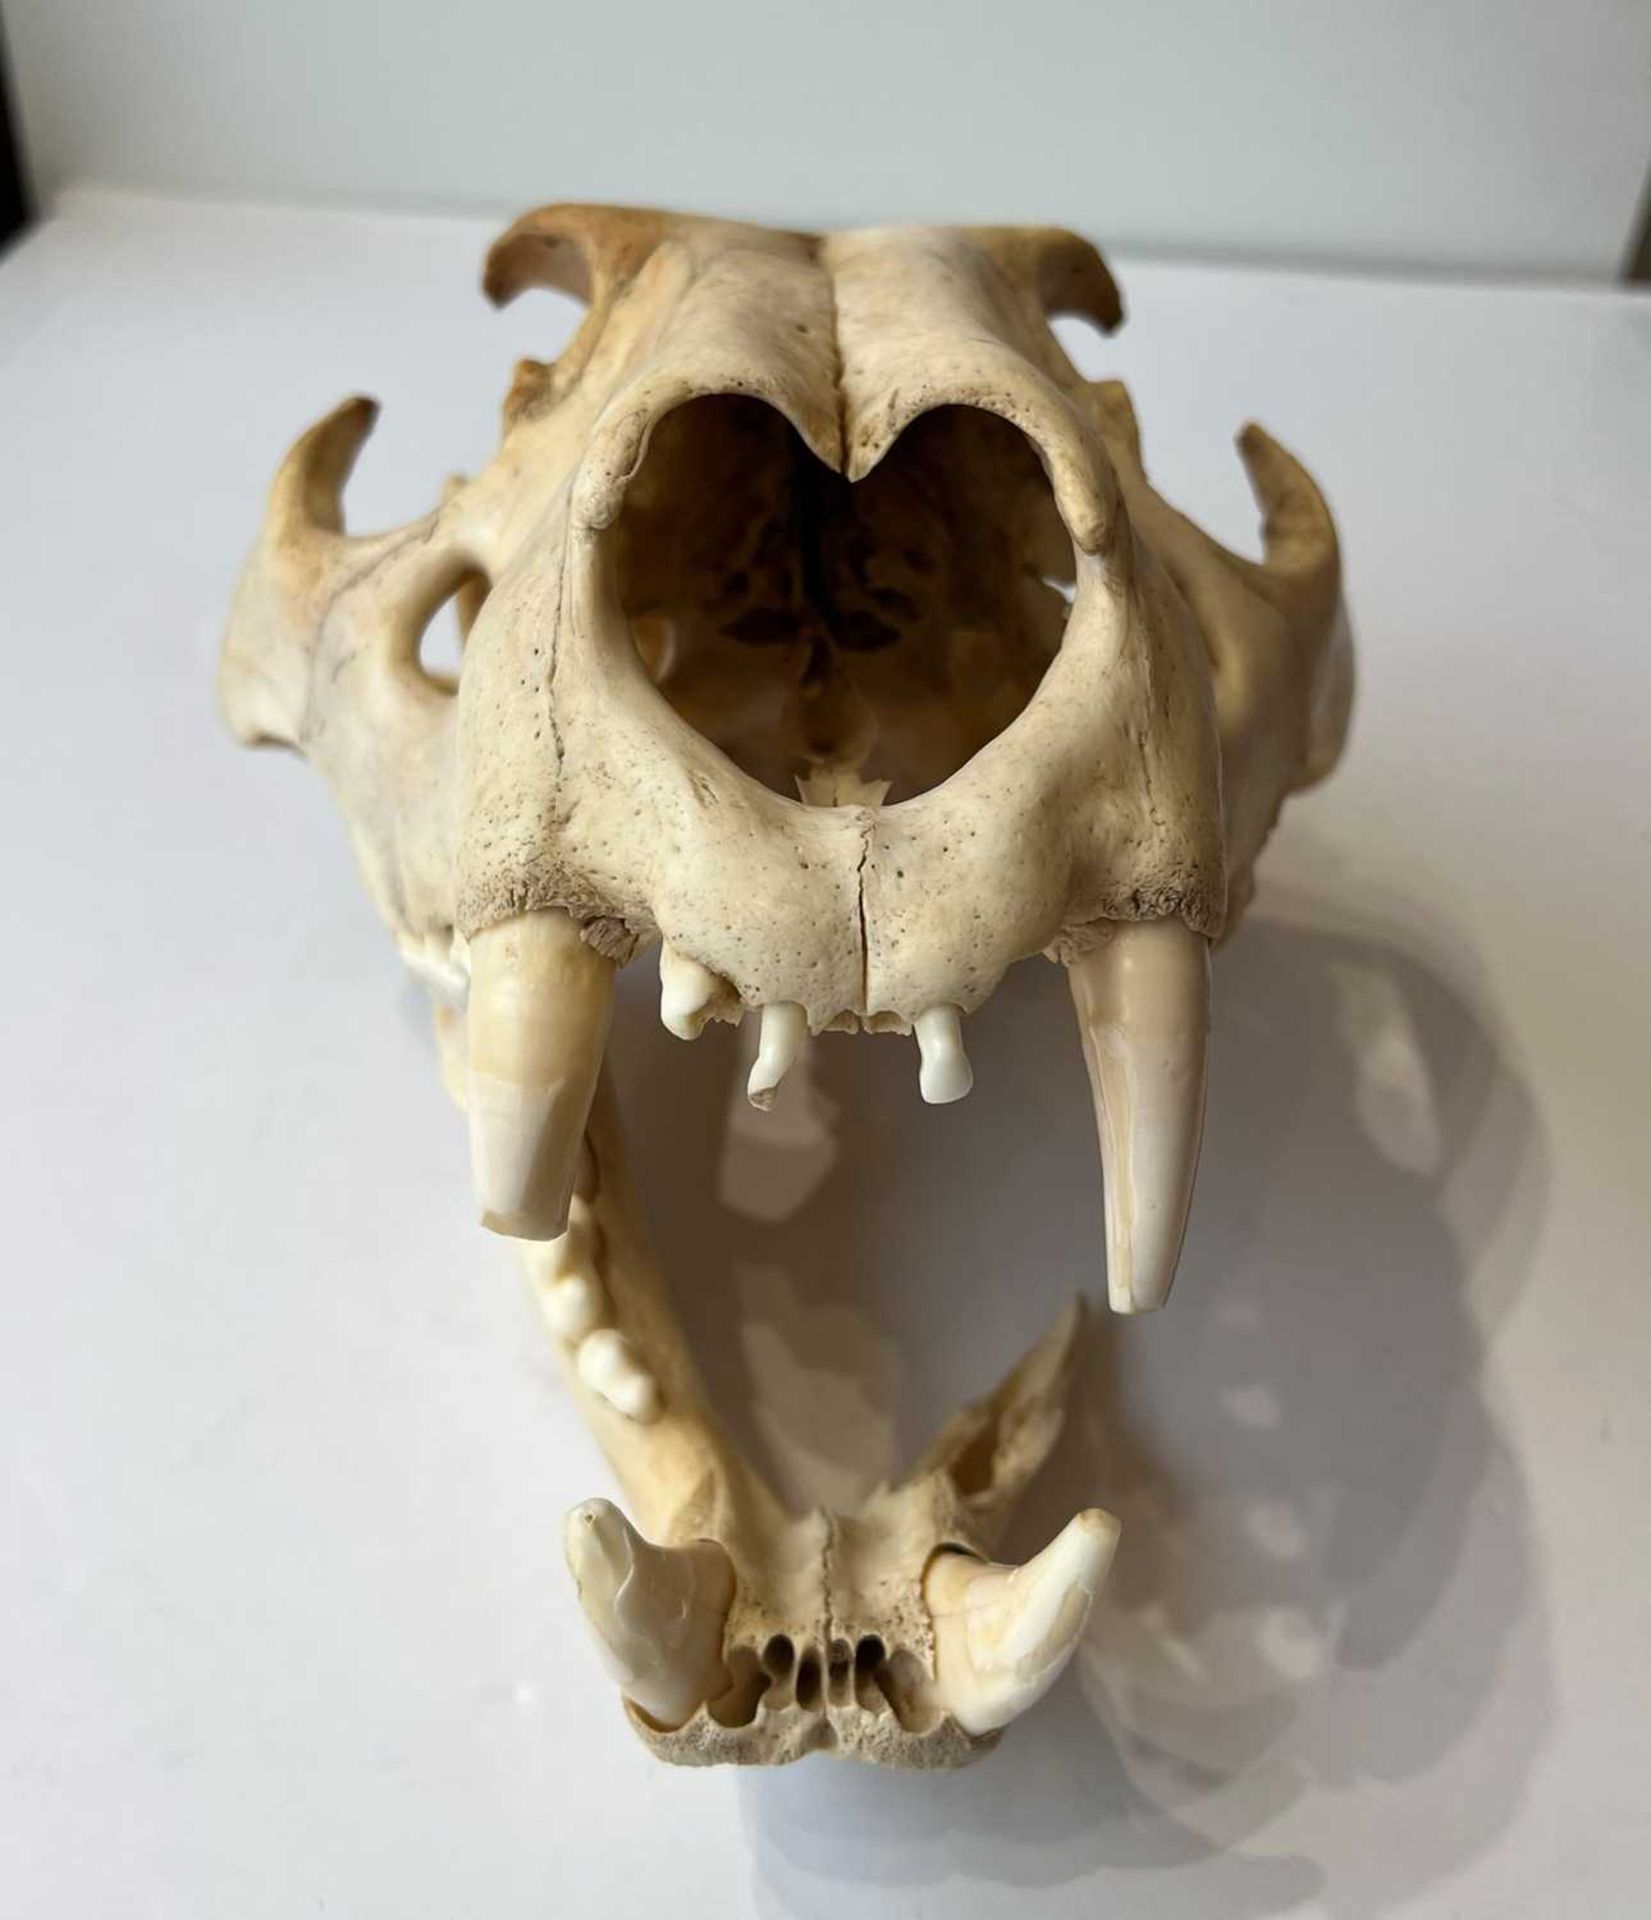 AN AFRICAN LION (PANTHERA LEO) SKULL, LATE 19TH CENTURY - Image 5 of 6